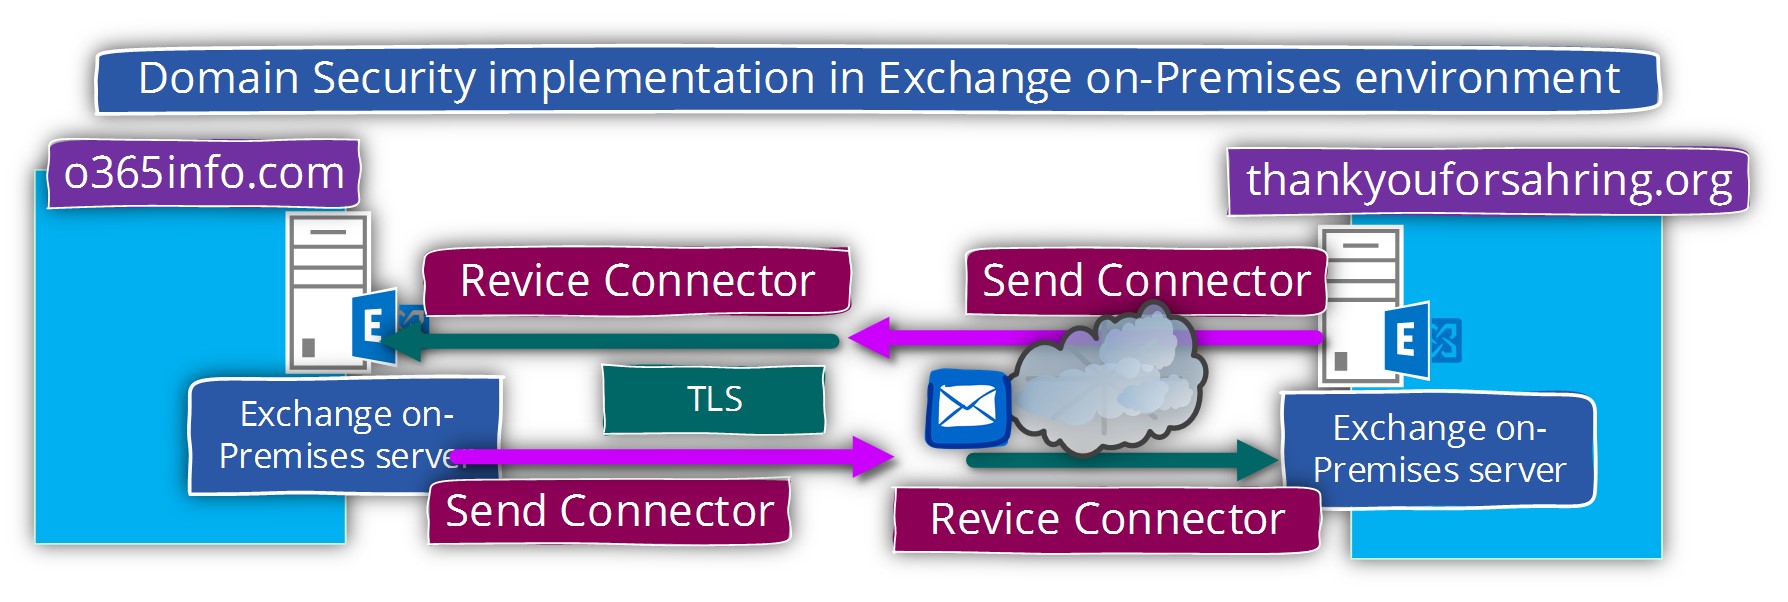 Domain Security implementation in Exchange on-Premises environment